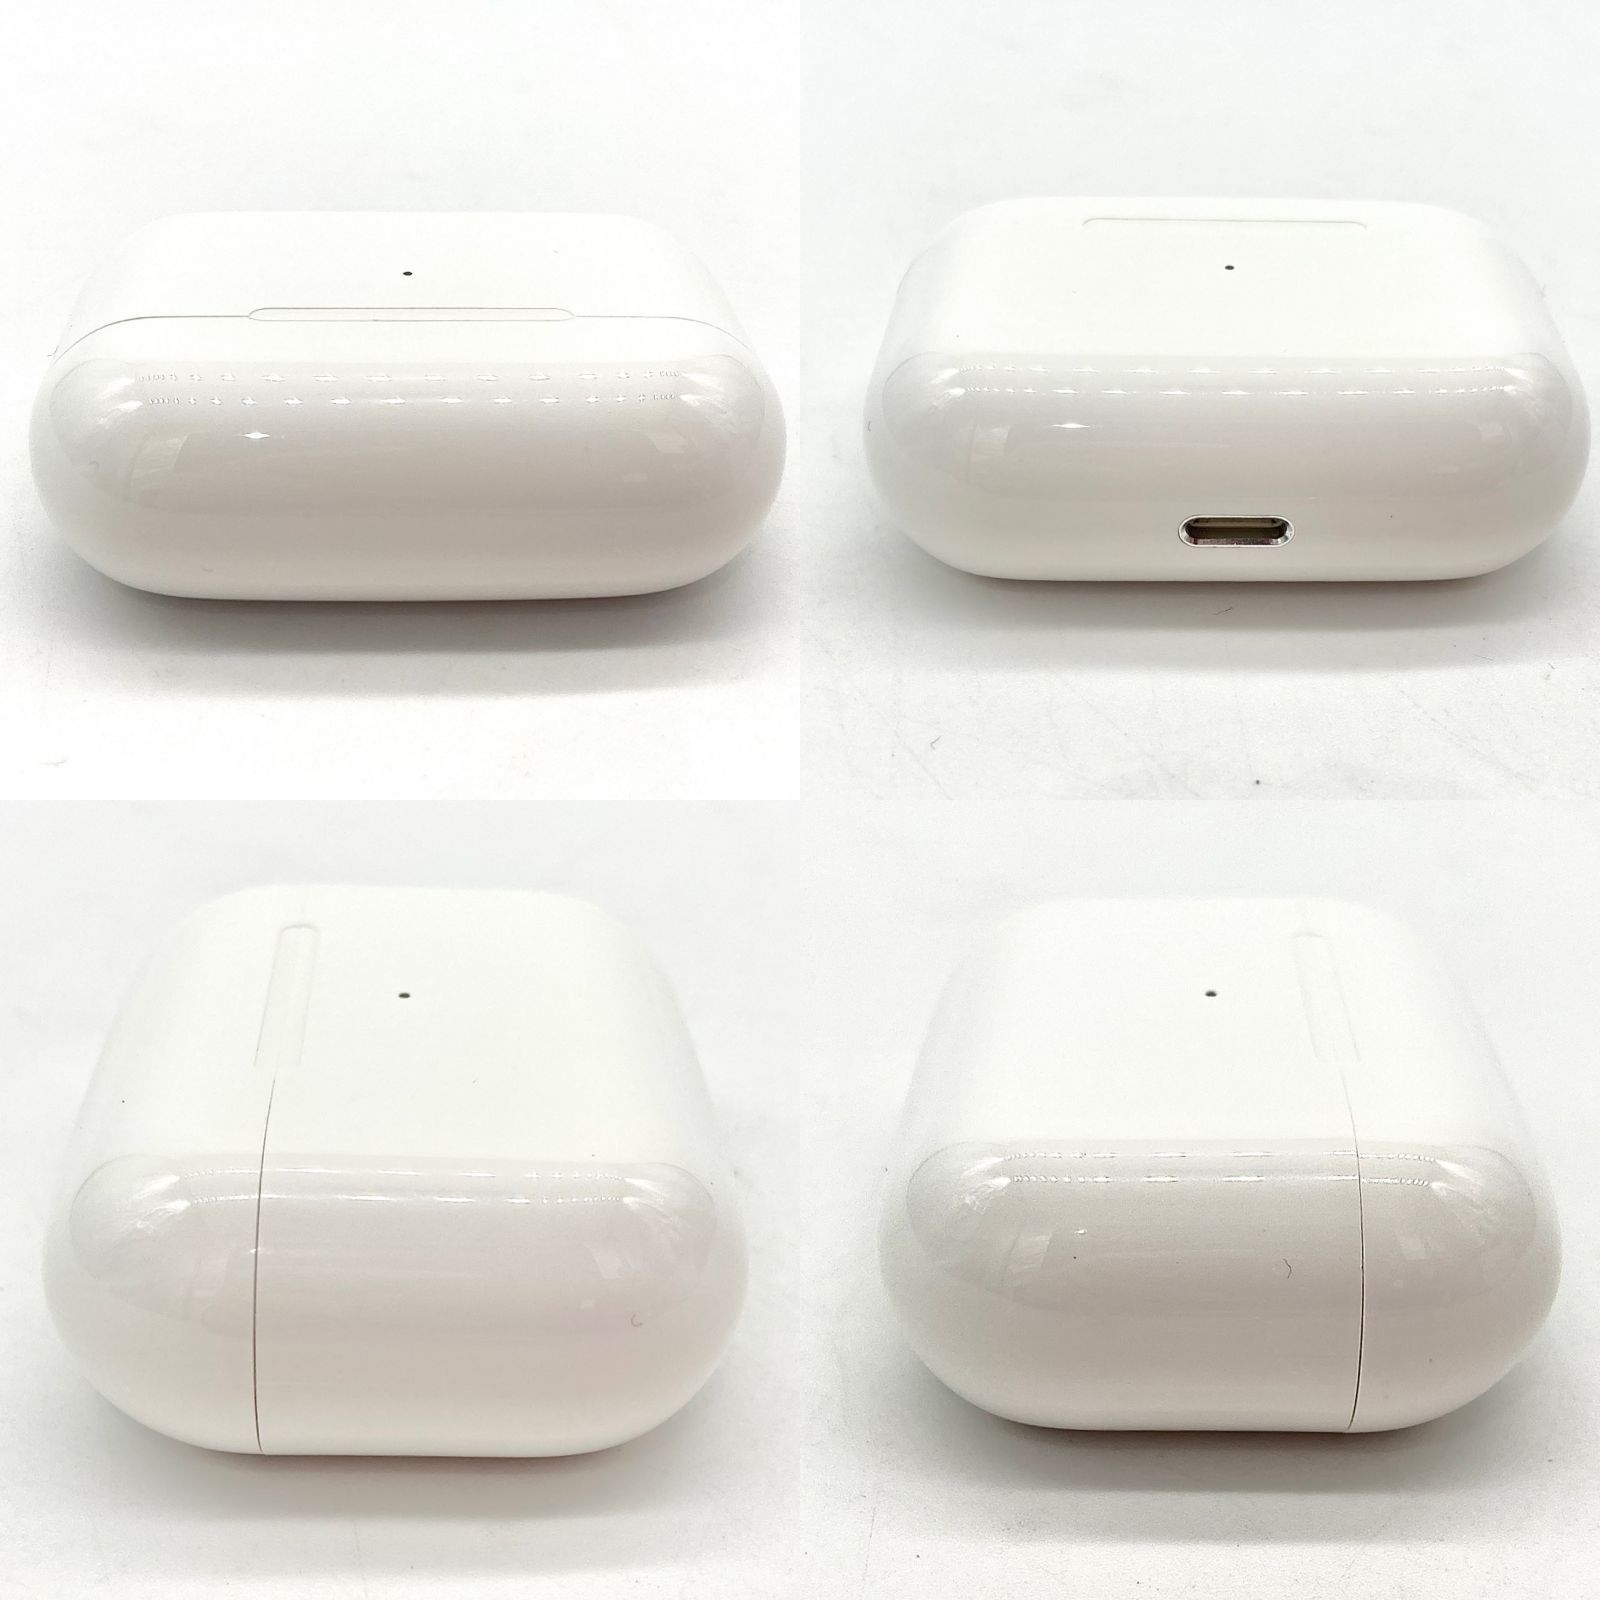 ▼Airpods Pro MWP22AM/A A2190 箱/冊子/予備イヤーチップ/ケーブル S13249660422